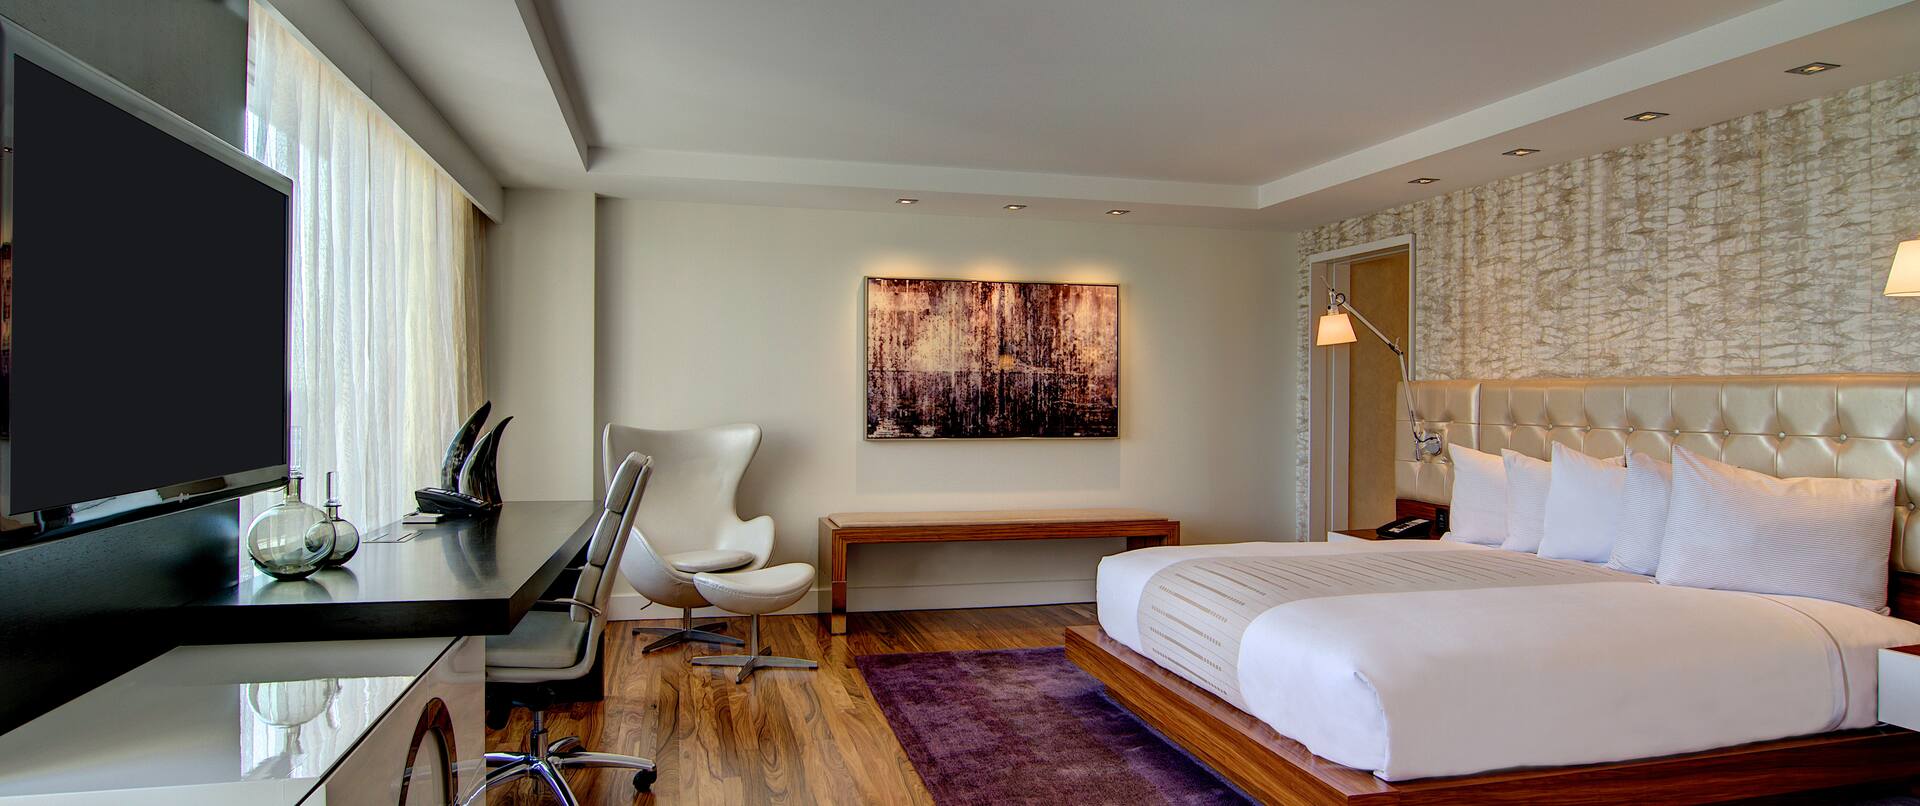 Suite Bedroom with bed on area rug, facing TV and work desk